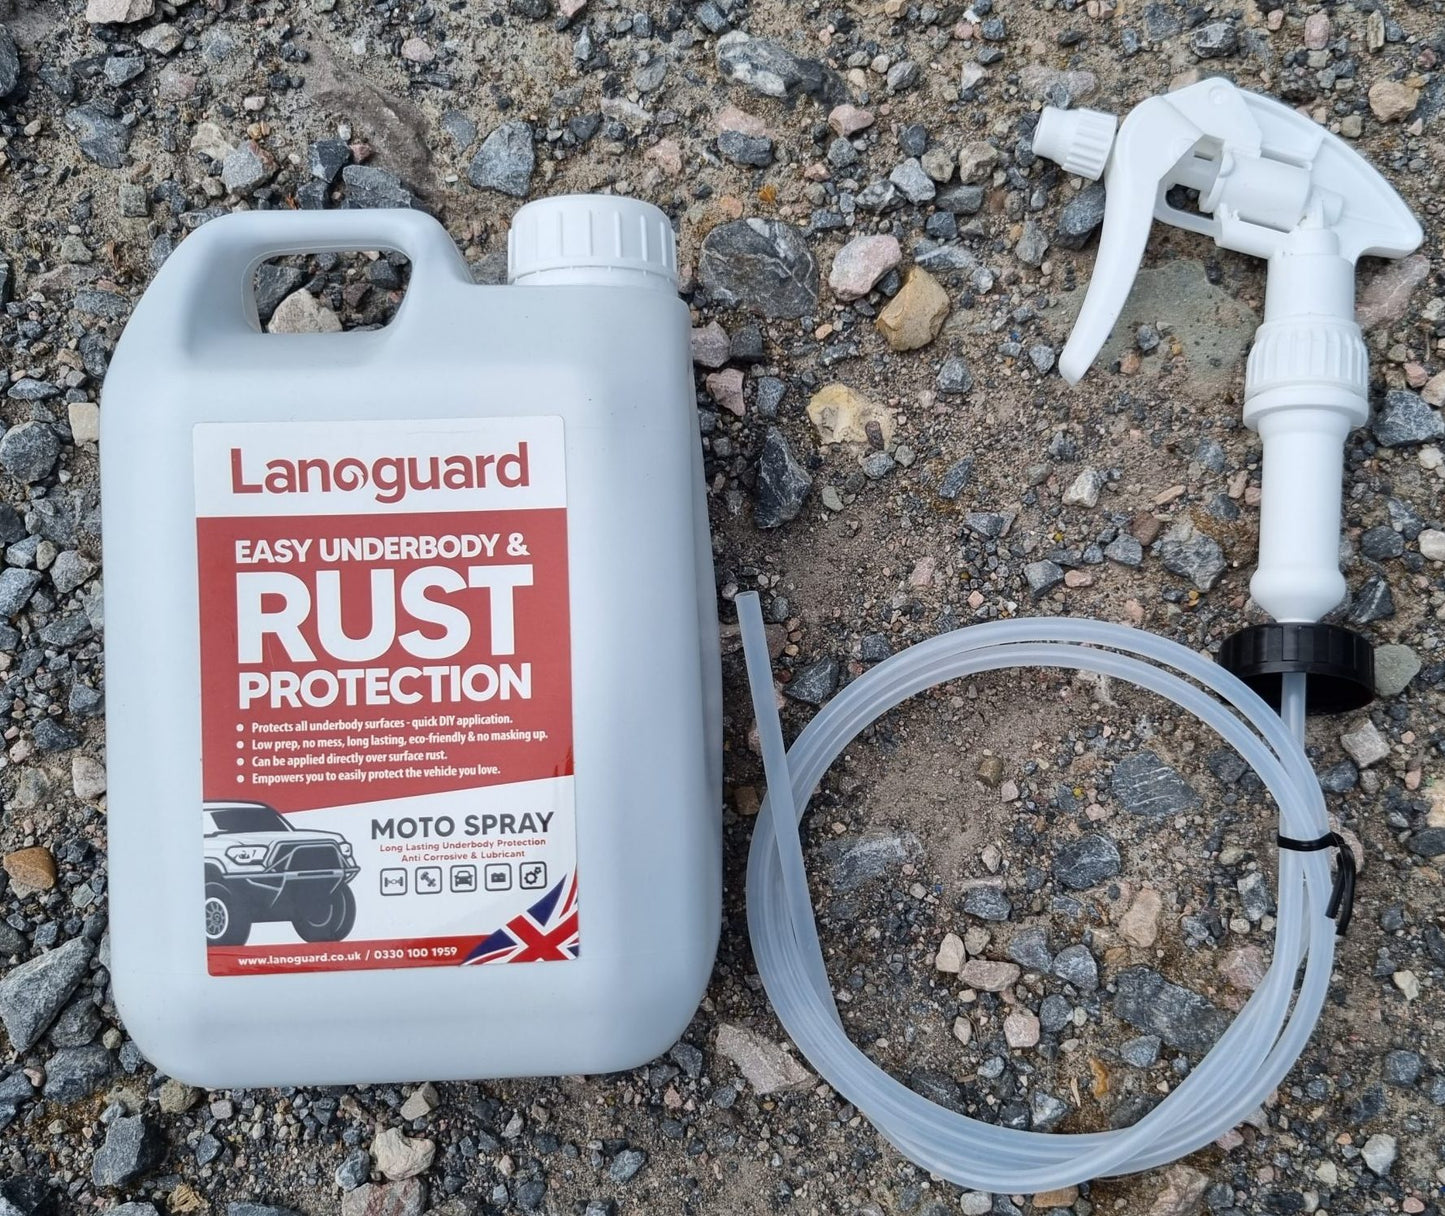 Lanoguard 5 litre moto spray with trigger kit for protecting vehicle undersides against rust salt and corrosion